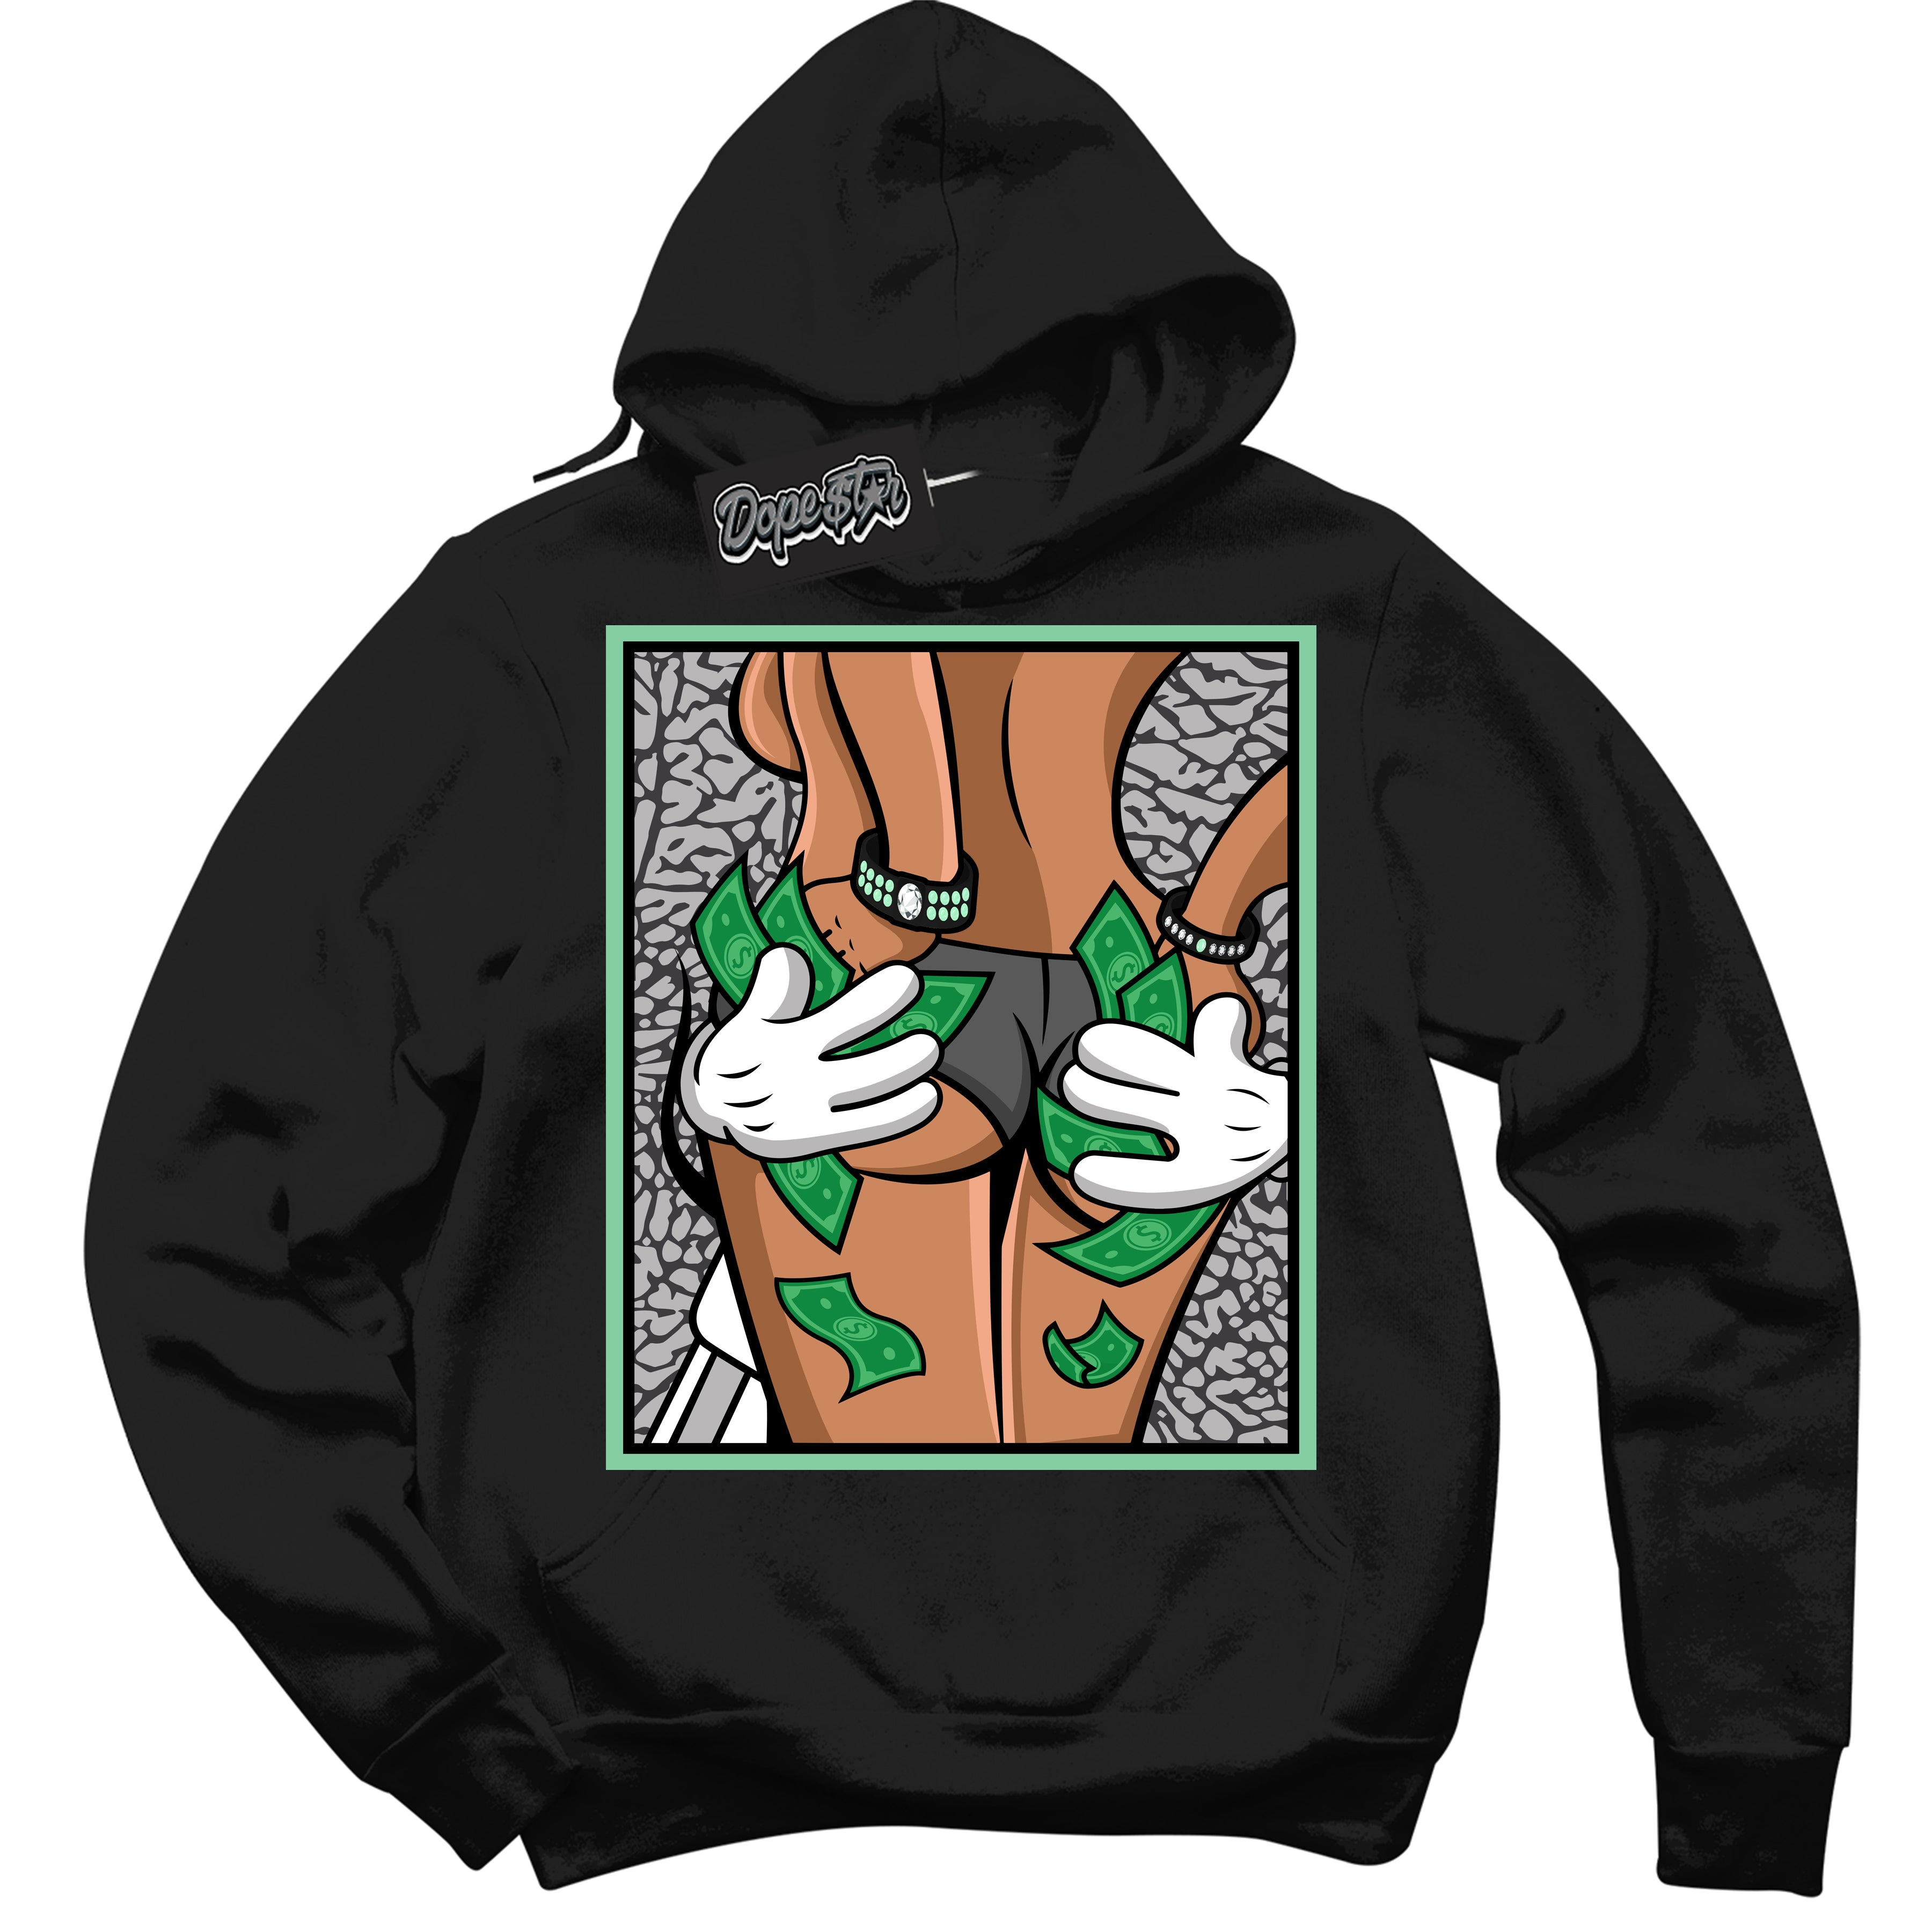 Cool Black Graphic DopeStar Hoodie with “ Money Hands “ print, that perfectly matches Green Glow 3S sneakers